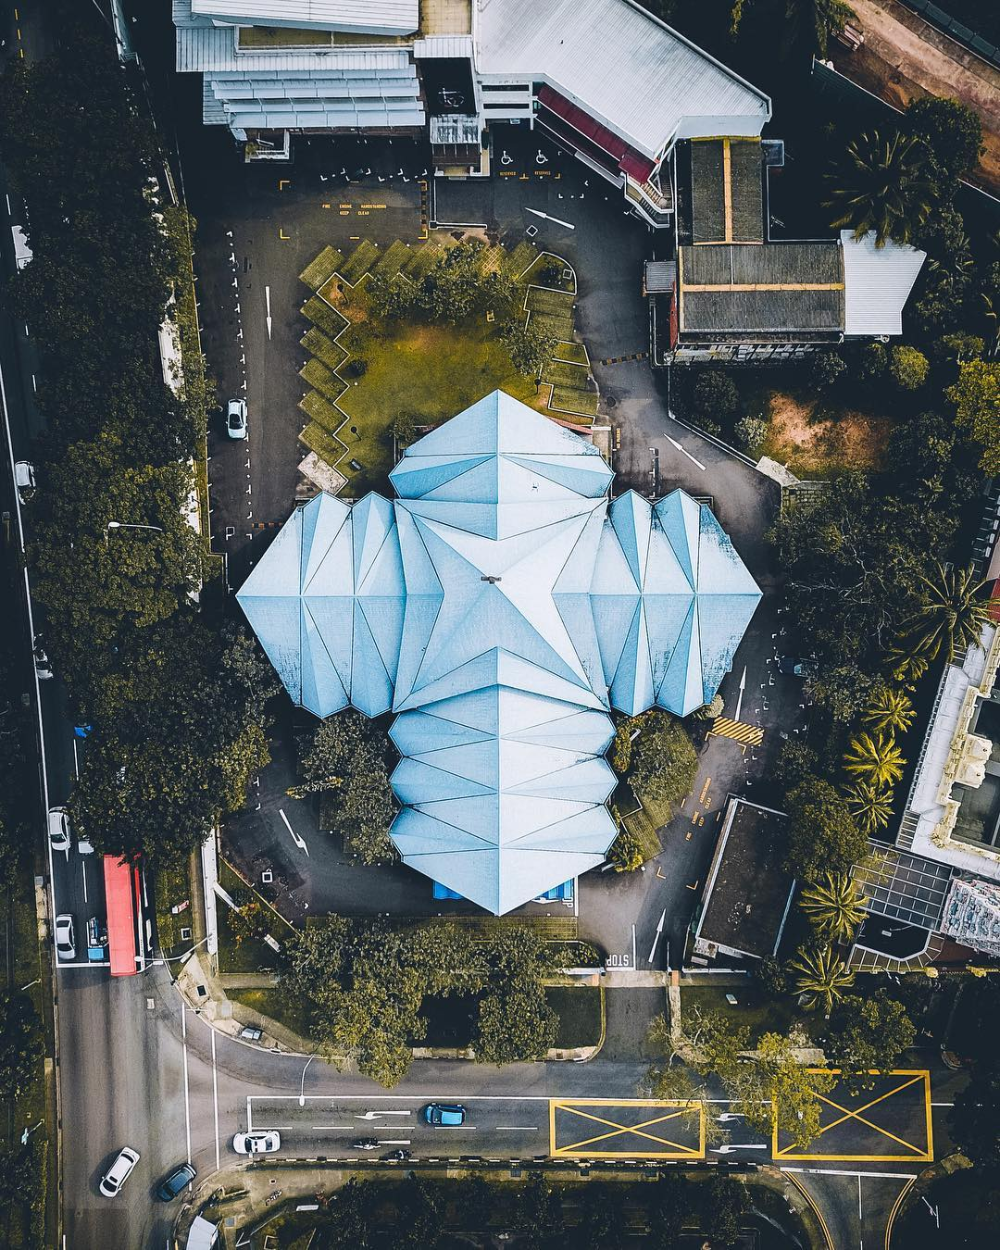 Singapore From Above: Inspiring Drone Photography By Ryan James